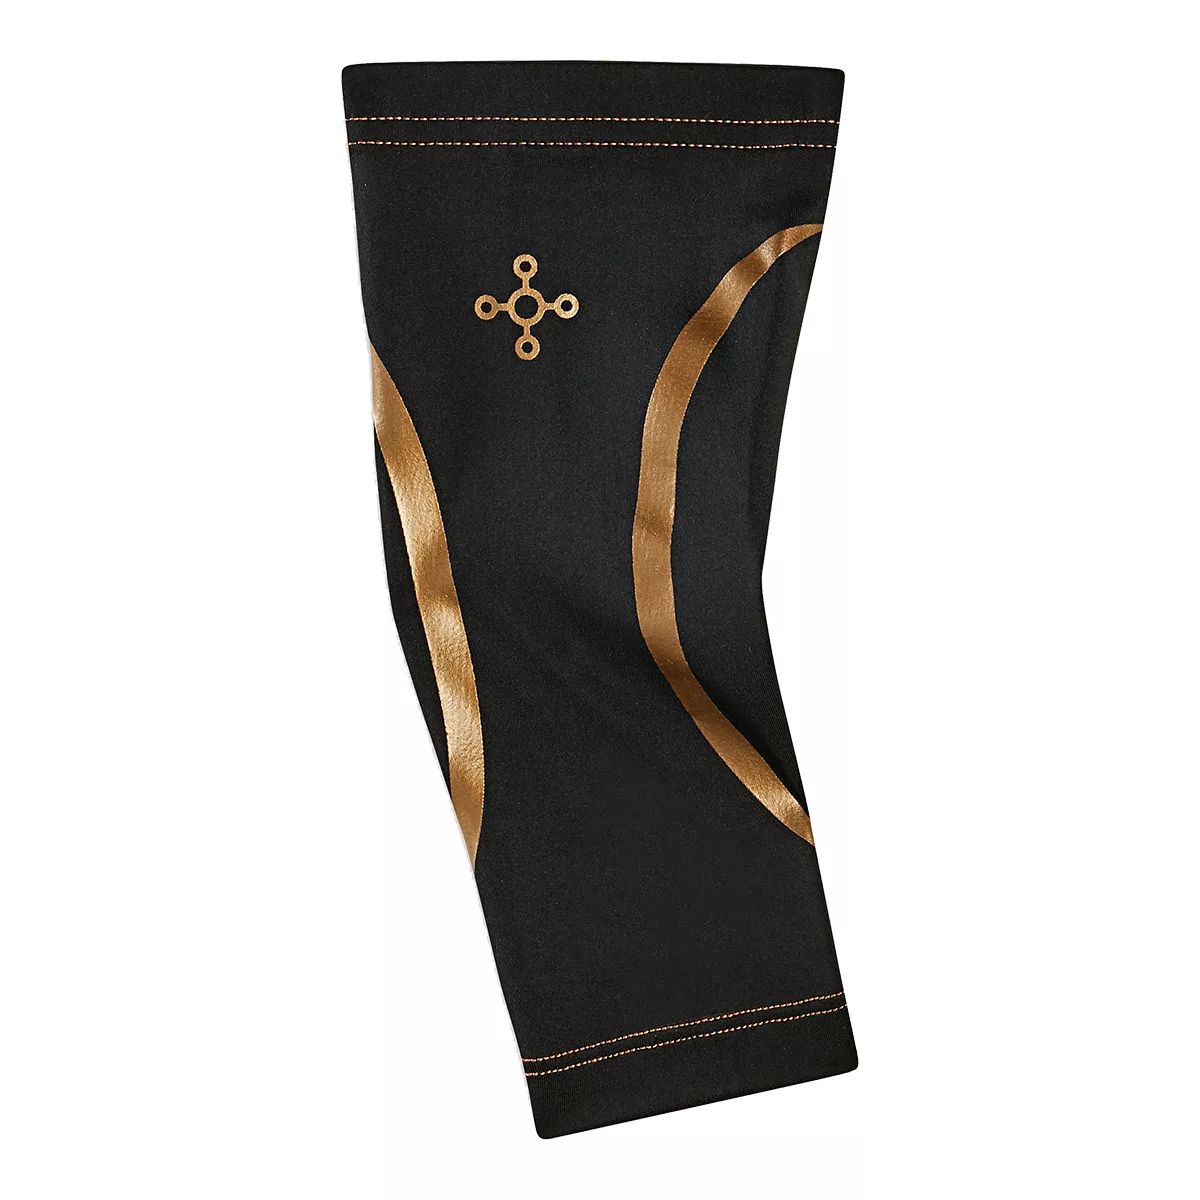 Image of Tommie Copper Compression Elbow Sleeve - Black